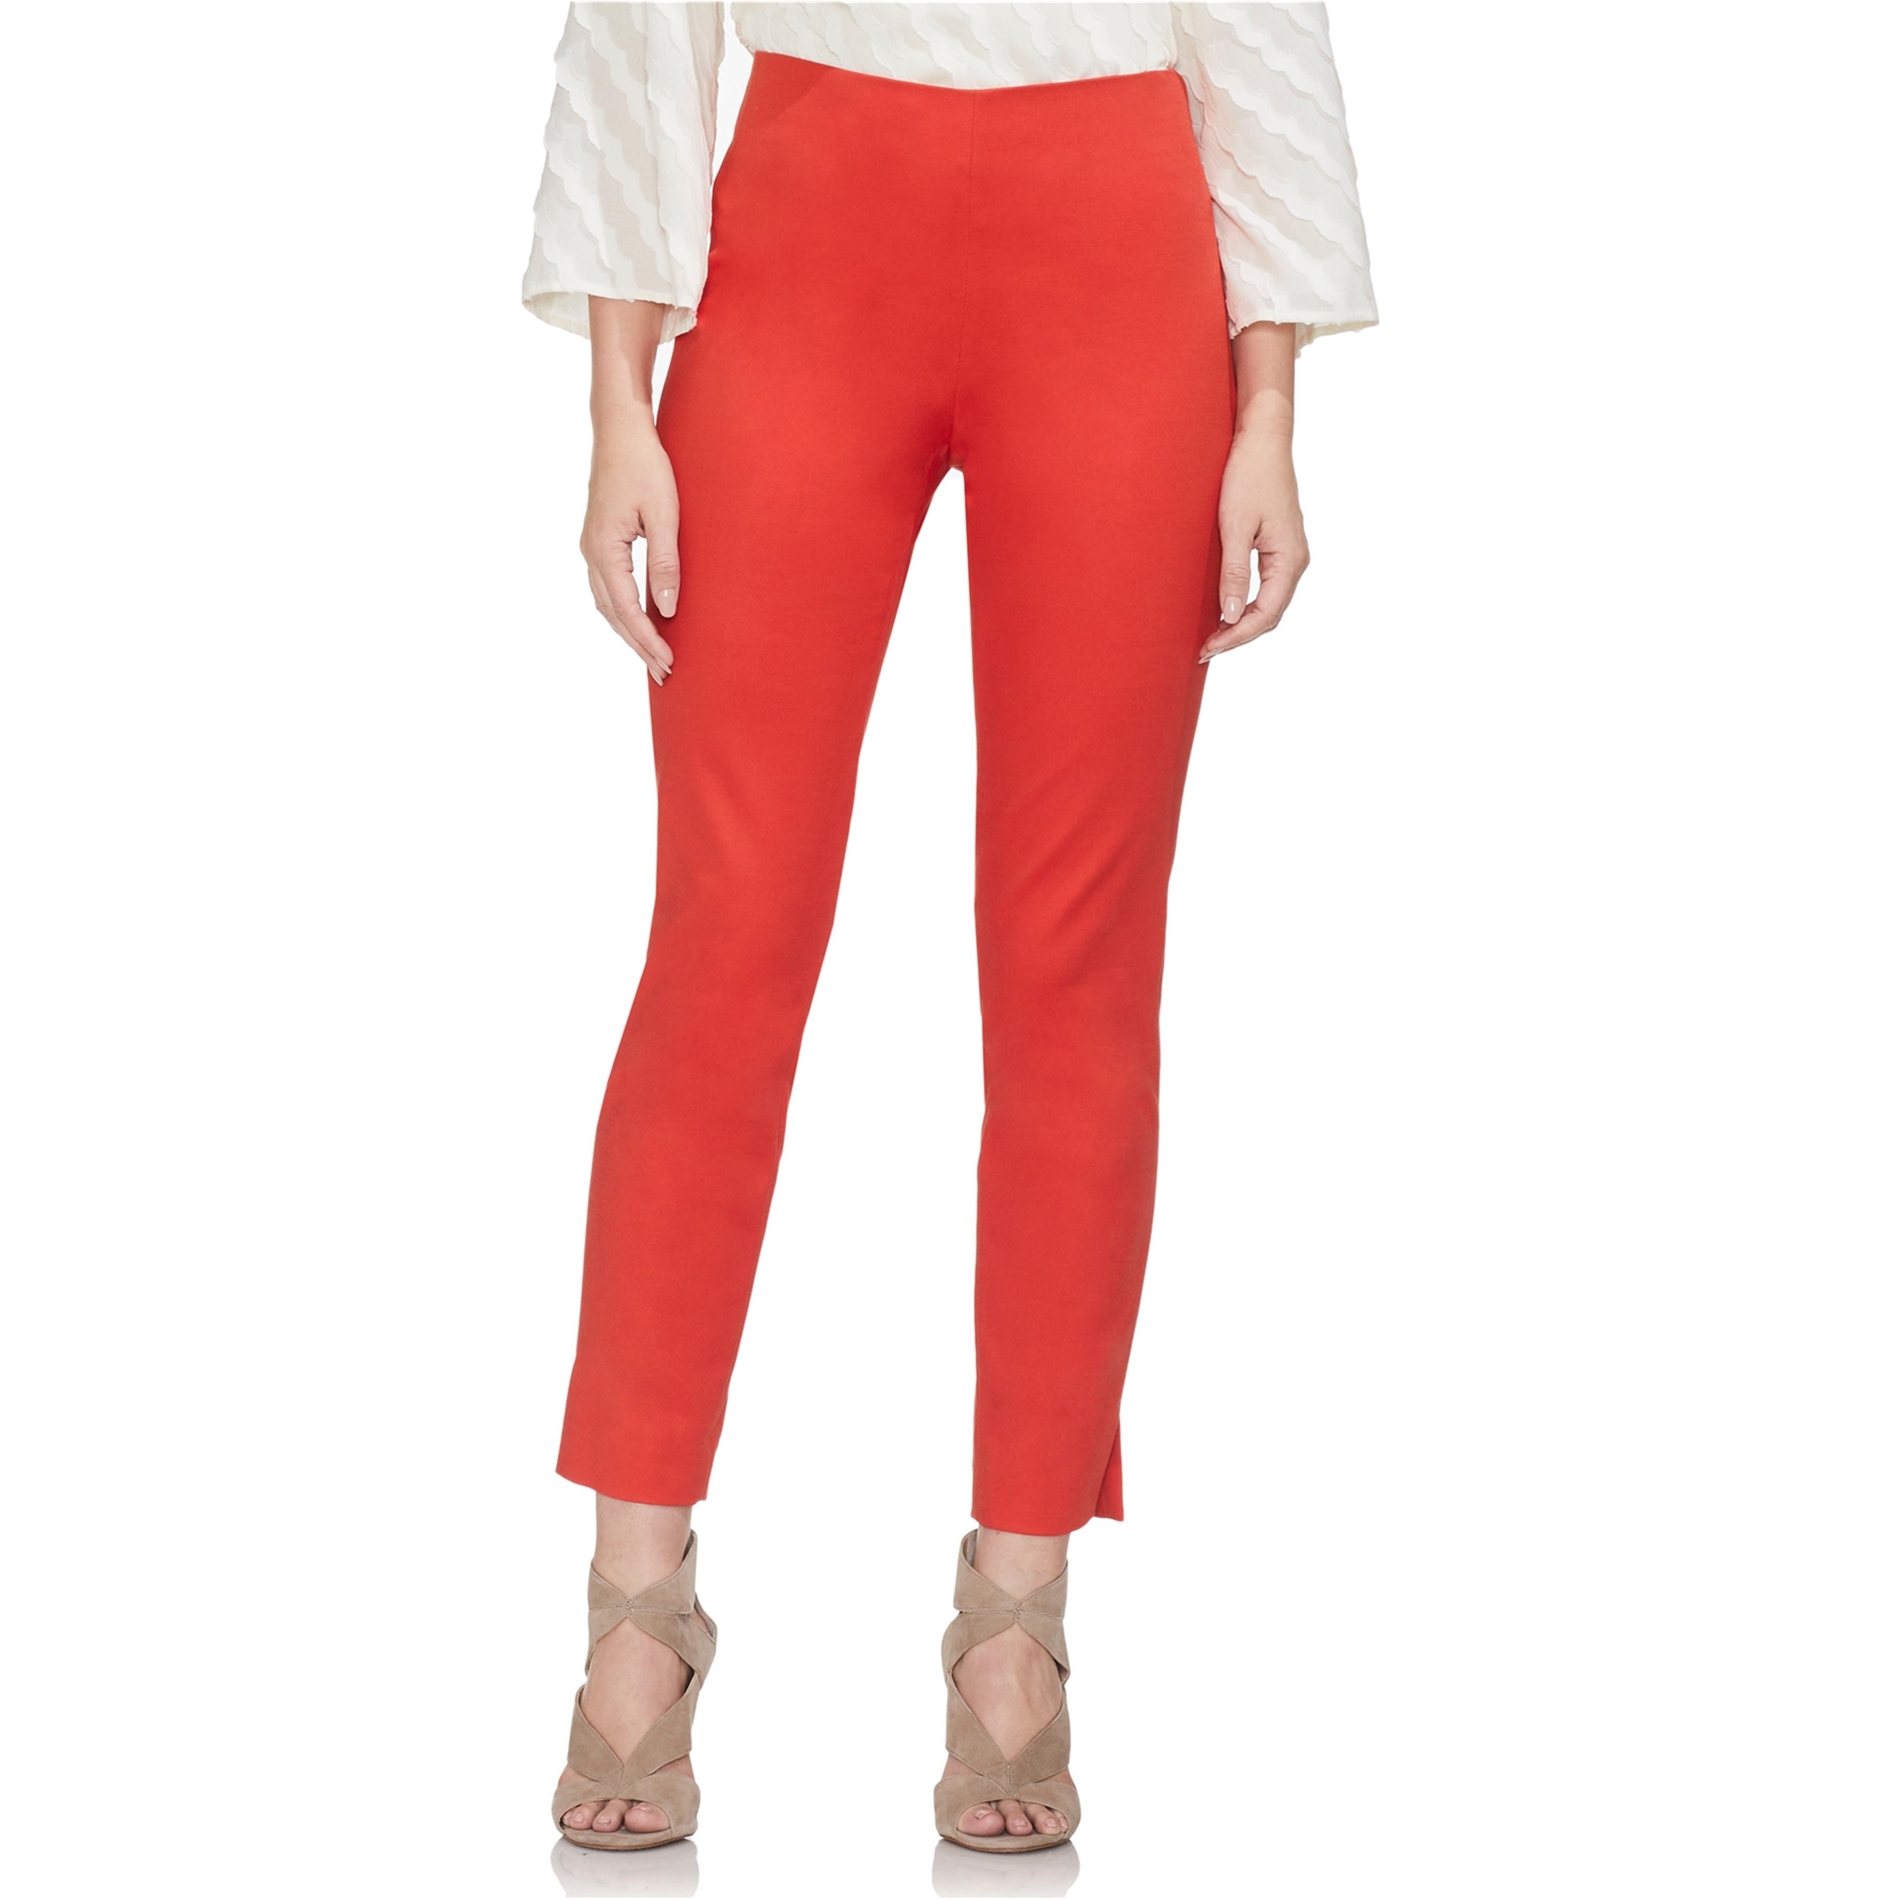 Vince Camuto Womens Vented Cuff Casual Trouser Pants